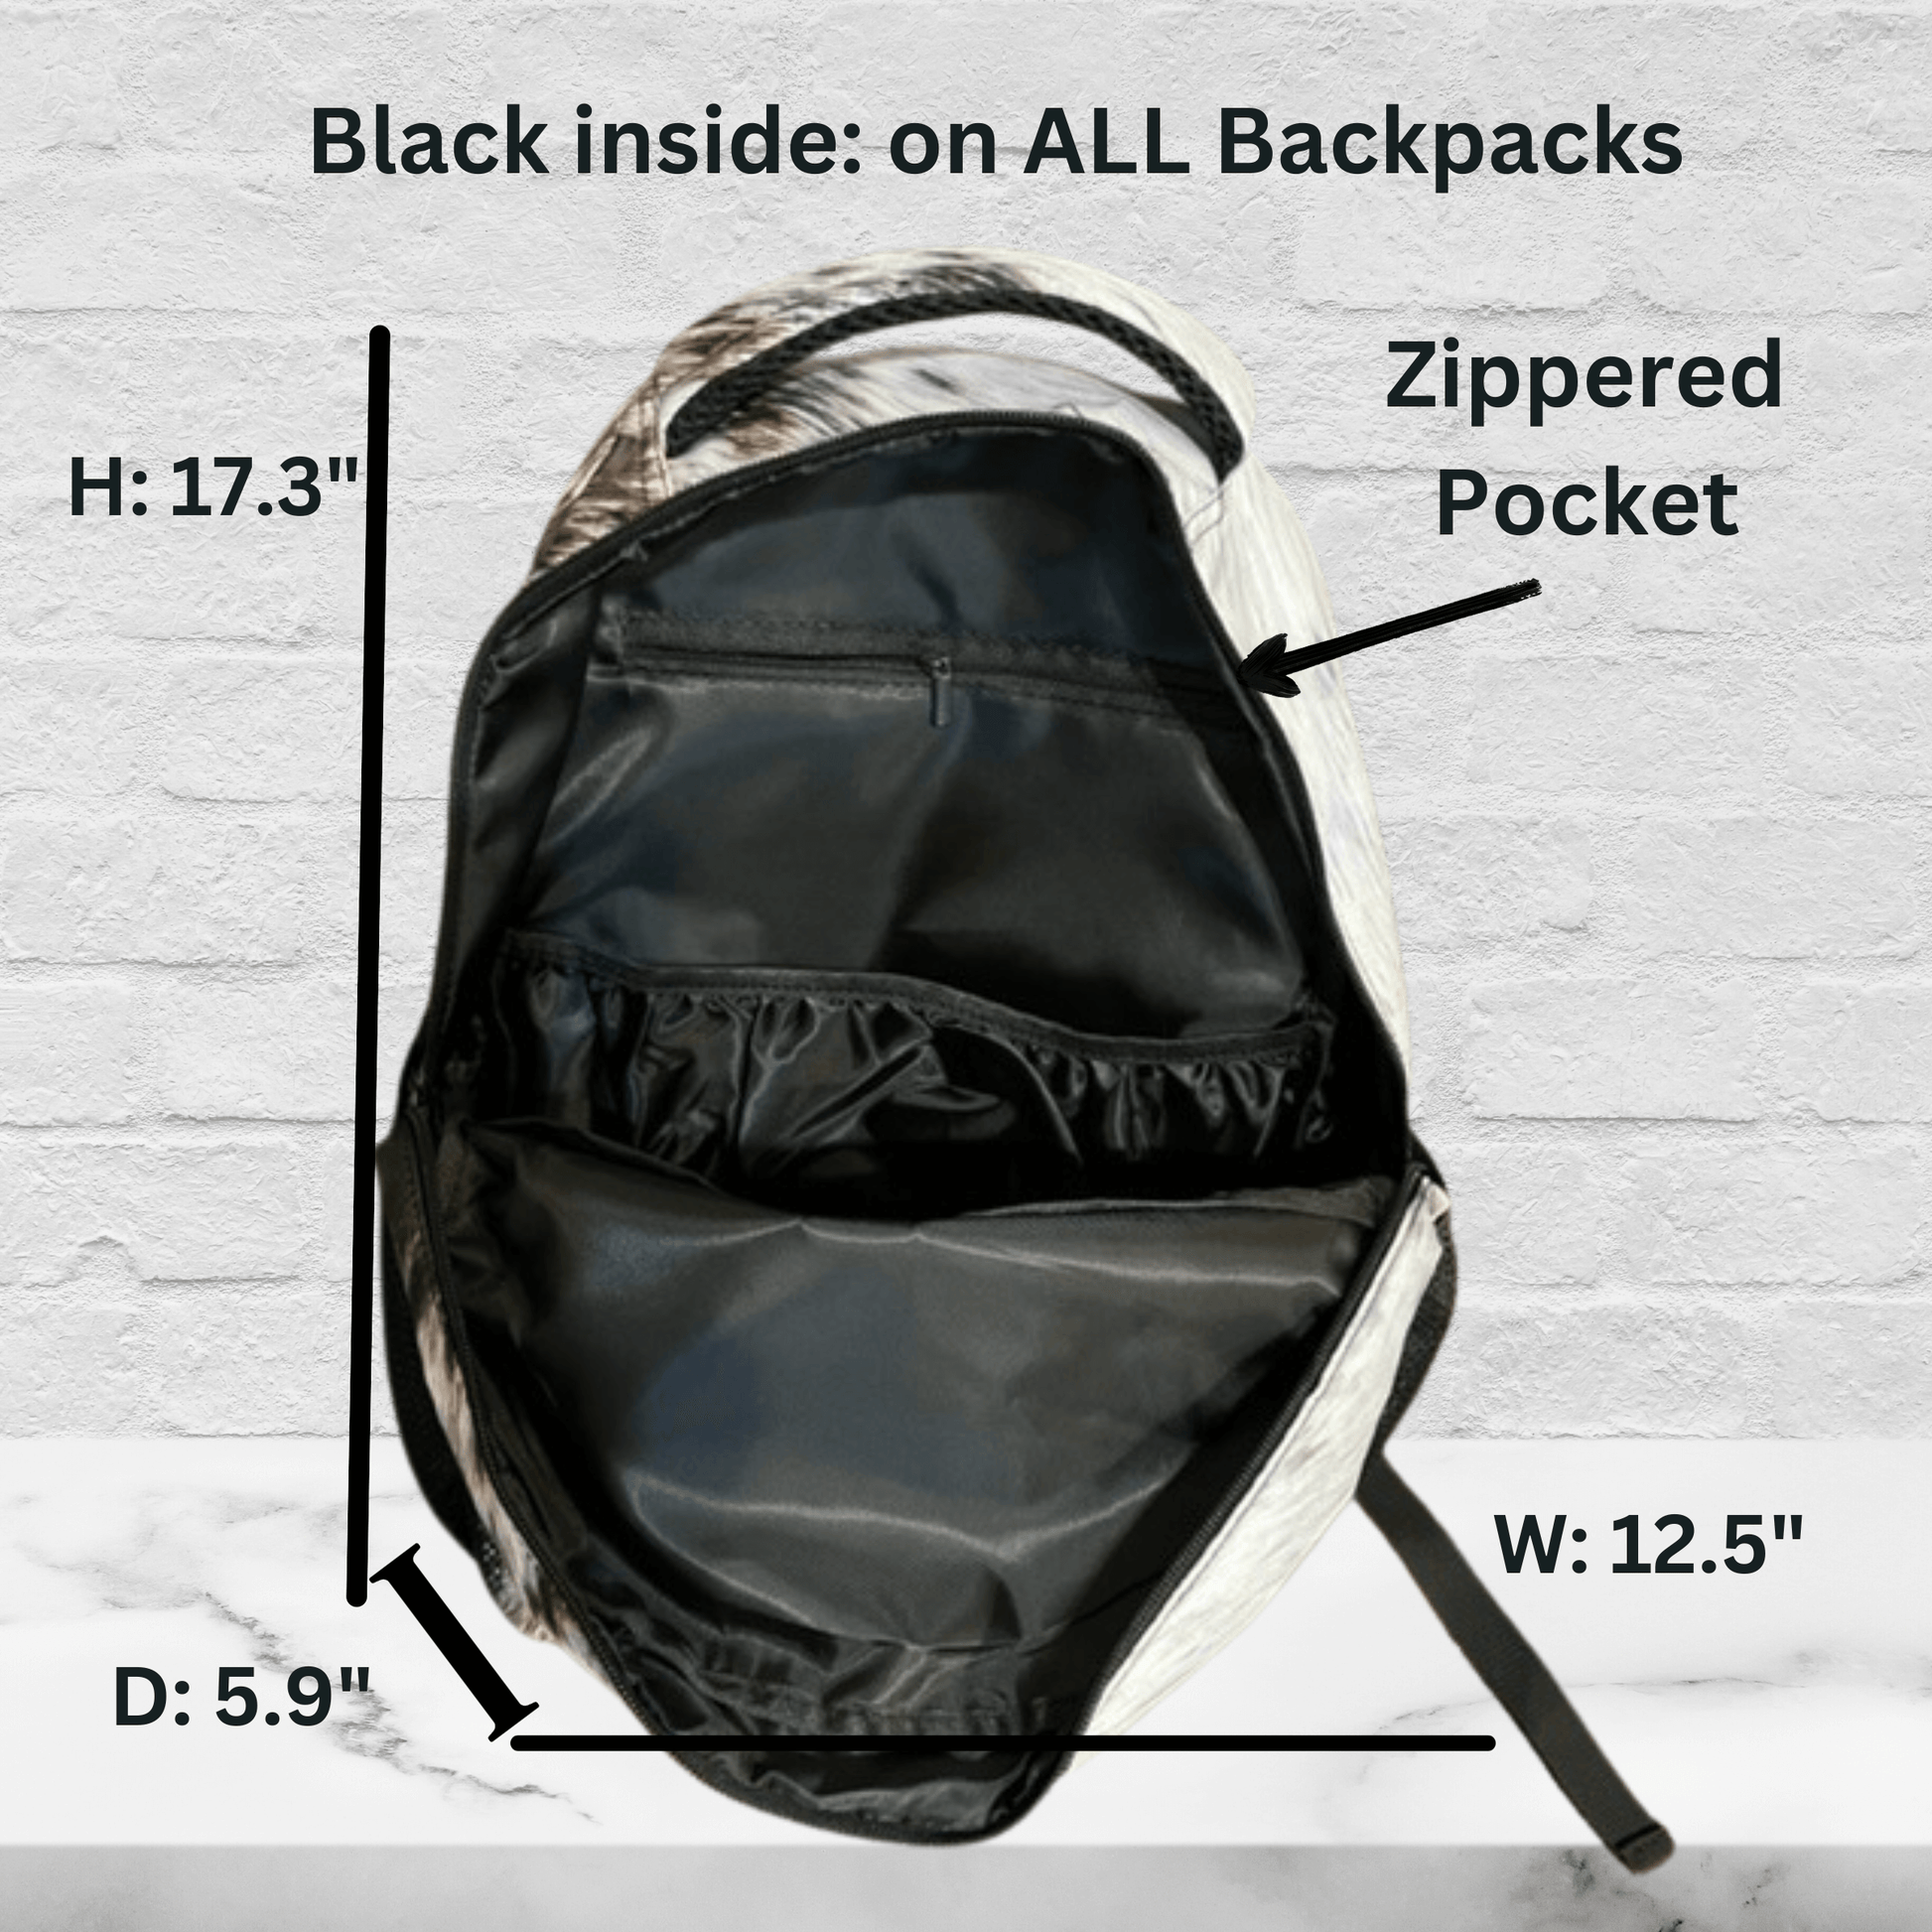 The inside of the backpack is black.